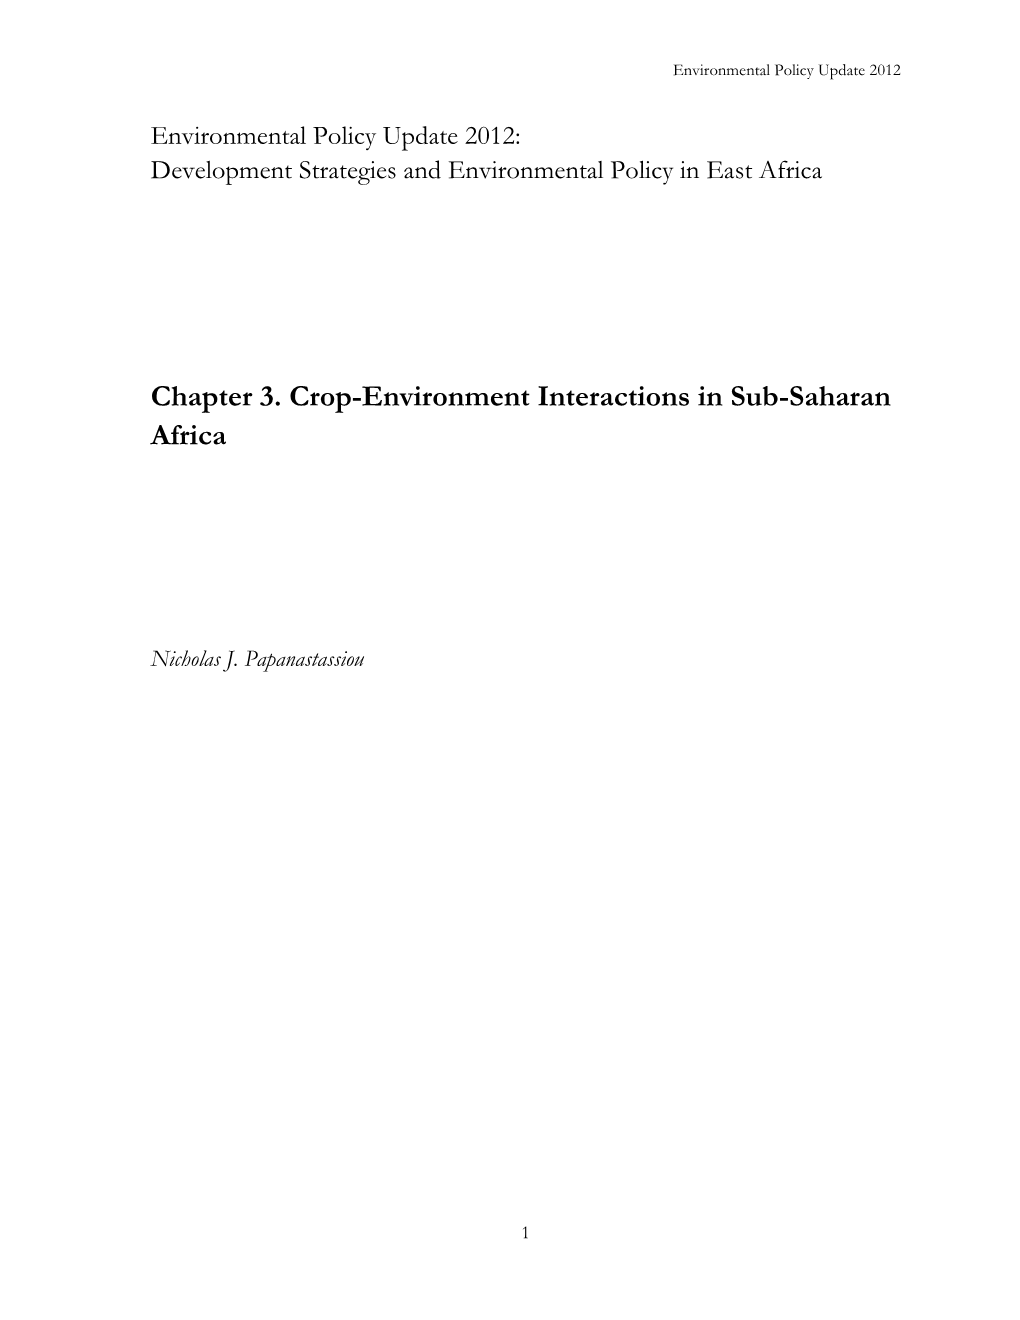 Chapter 3. Crop-Environment Interactions in Sub-Saharan Africa